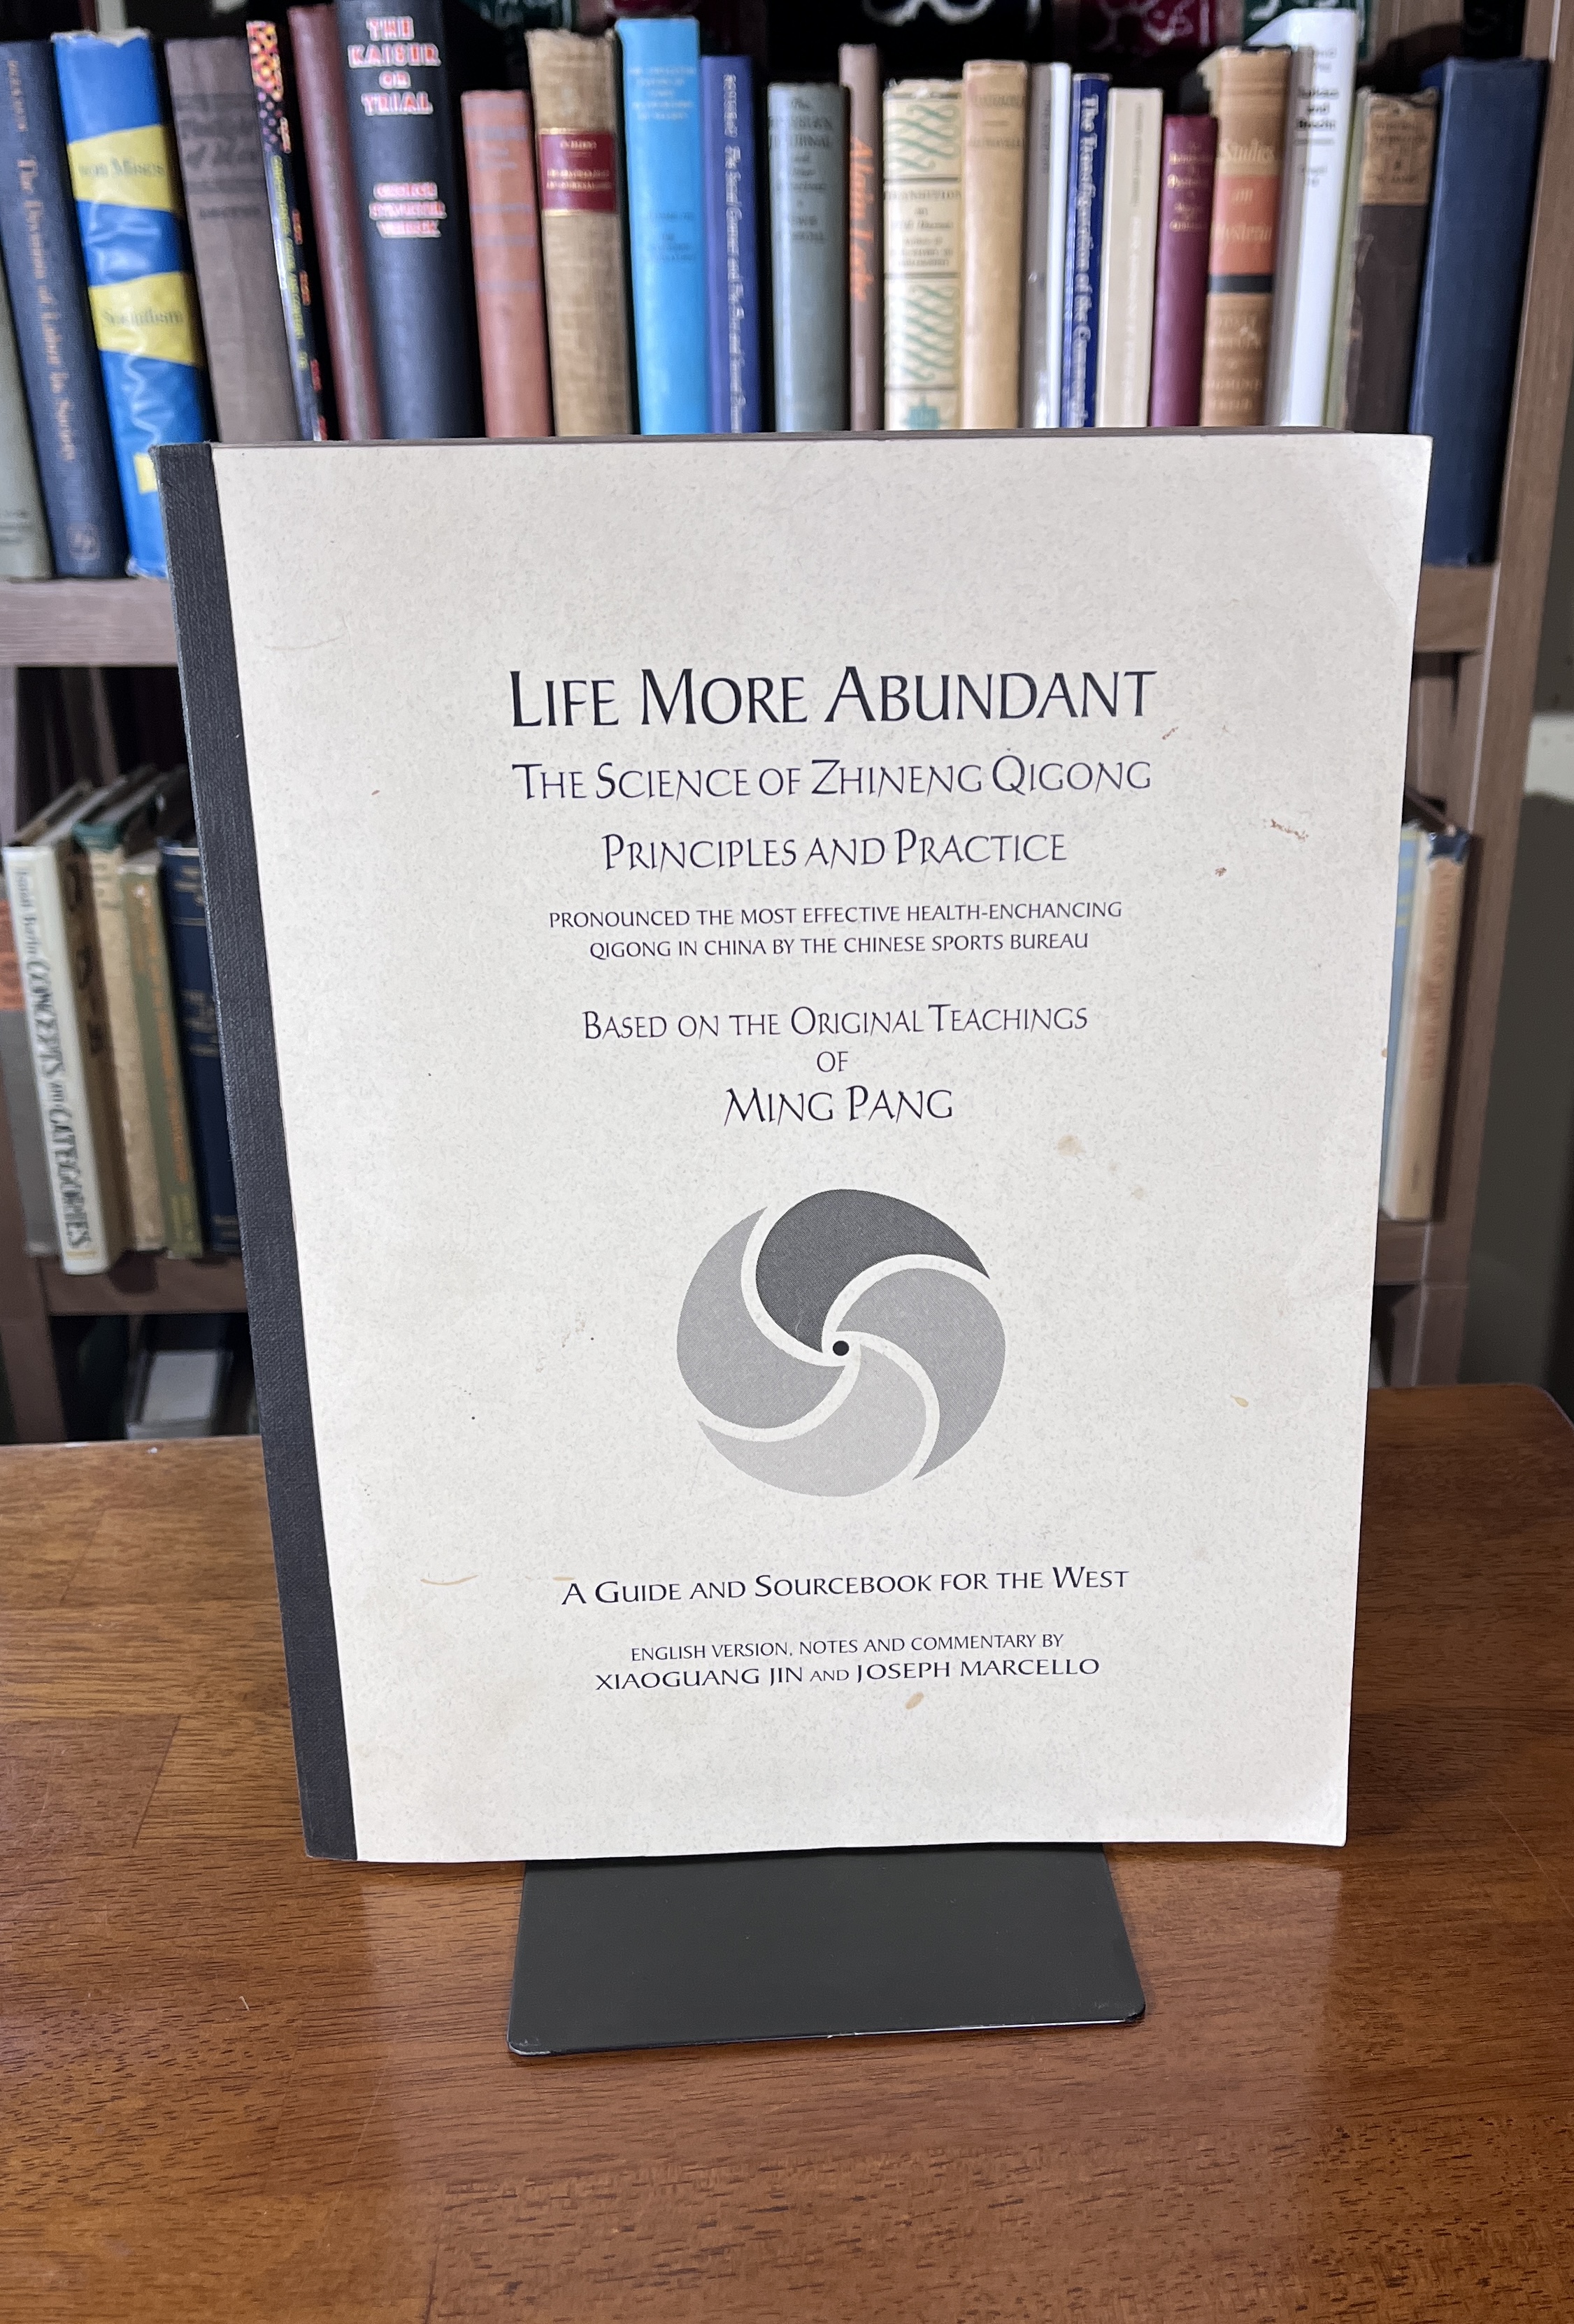 Image for "Life More Abundant: The Science of Zhineng Qigong, Principles and Practice : Based on the Original Teachings of Ming Pang : a Guide and Sourcebook for the West"